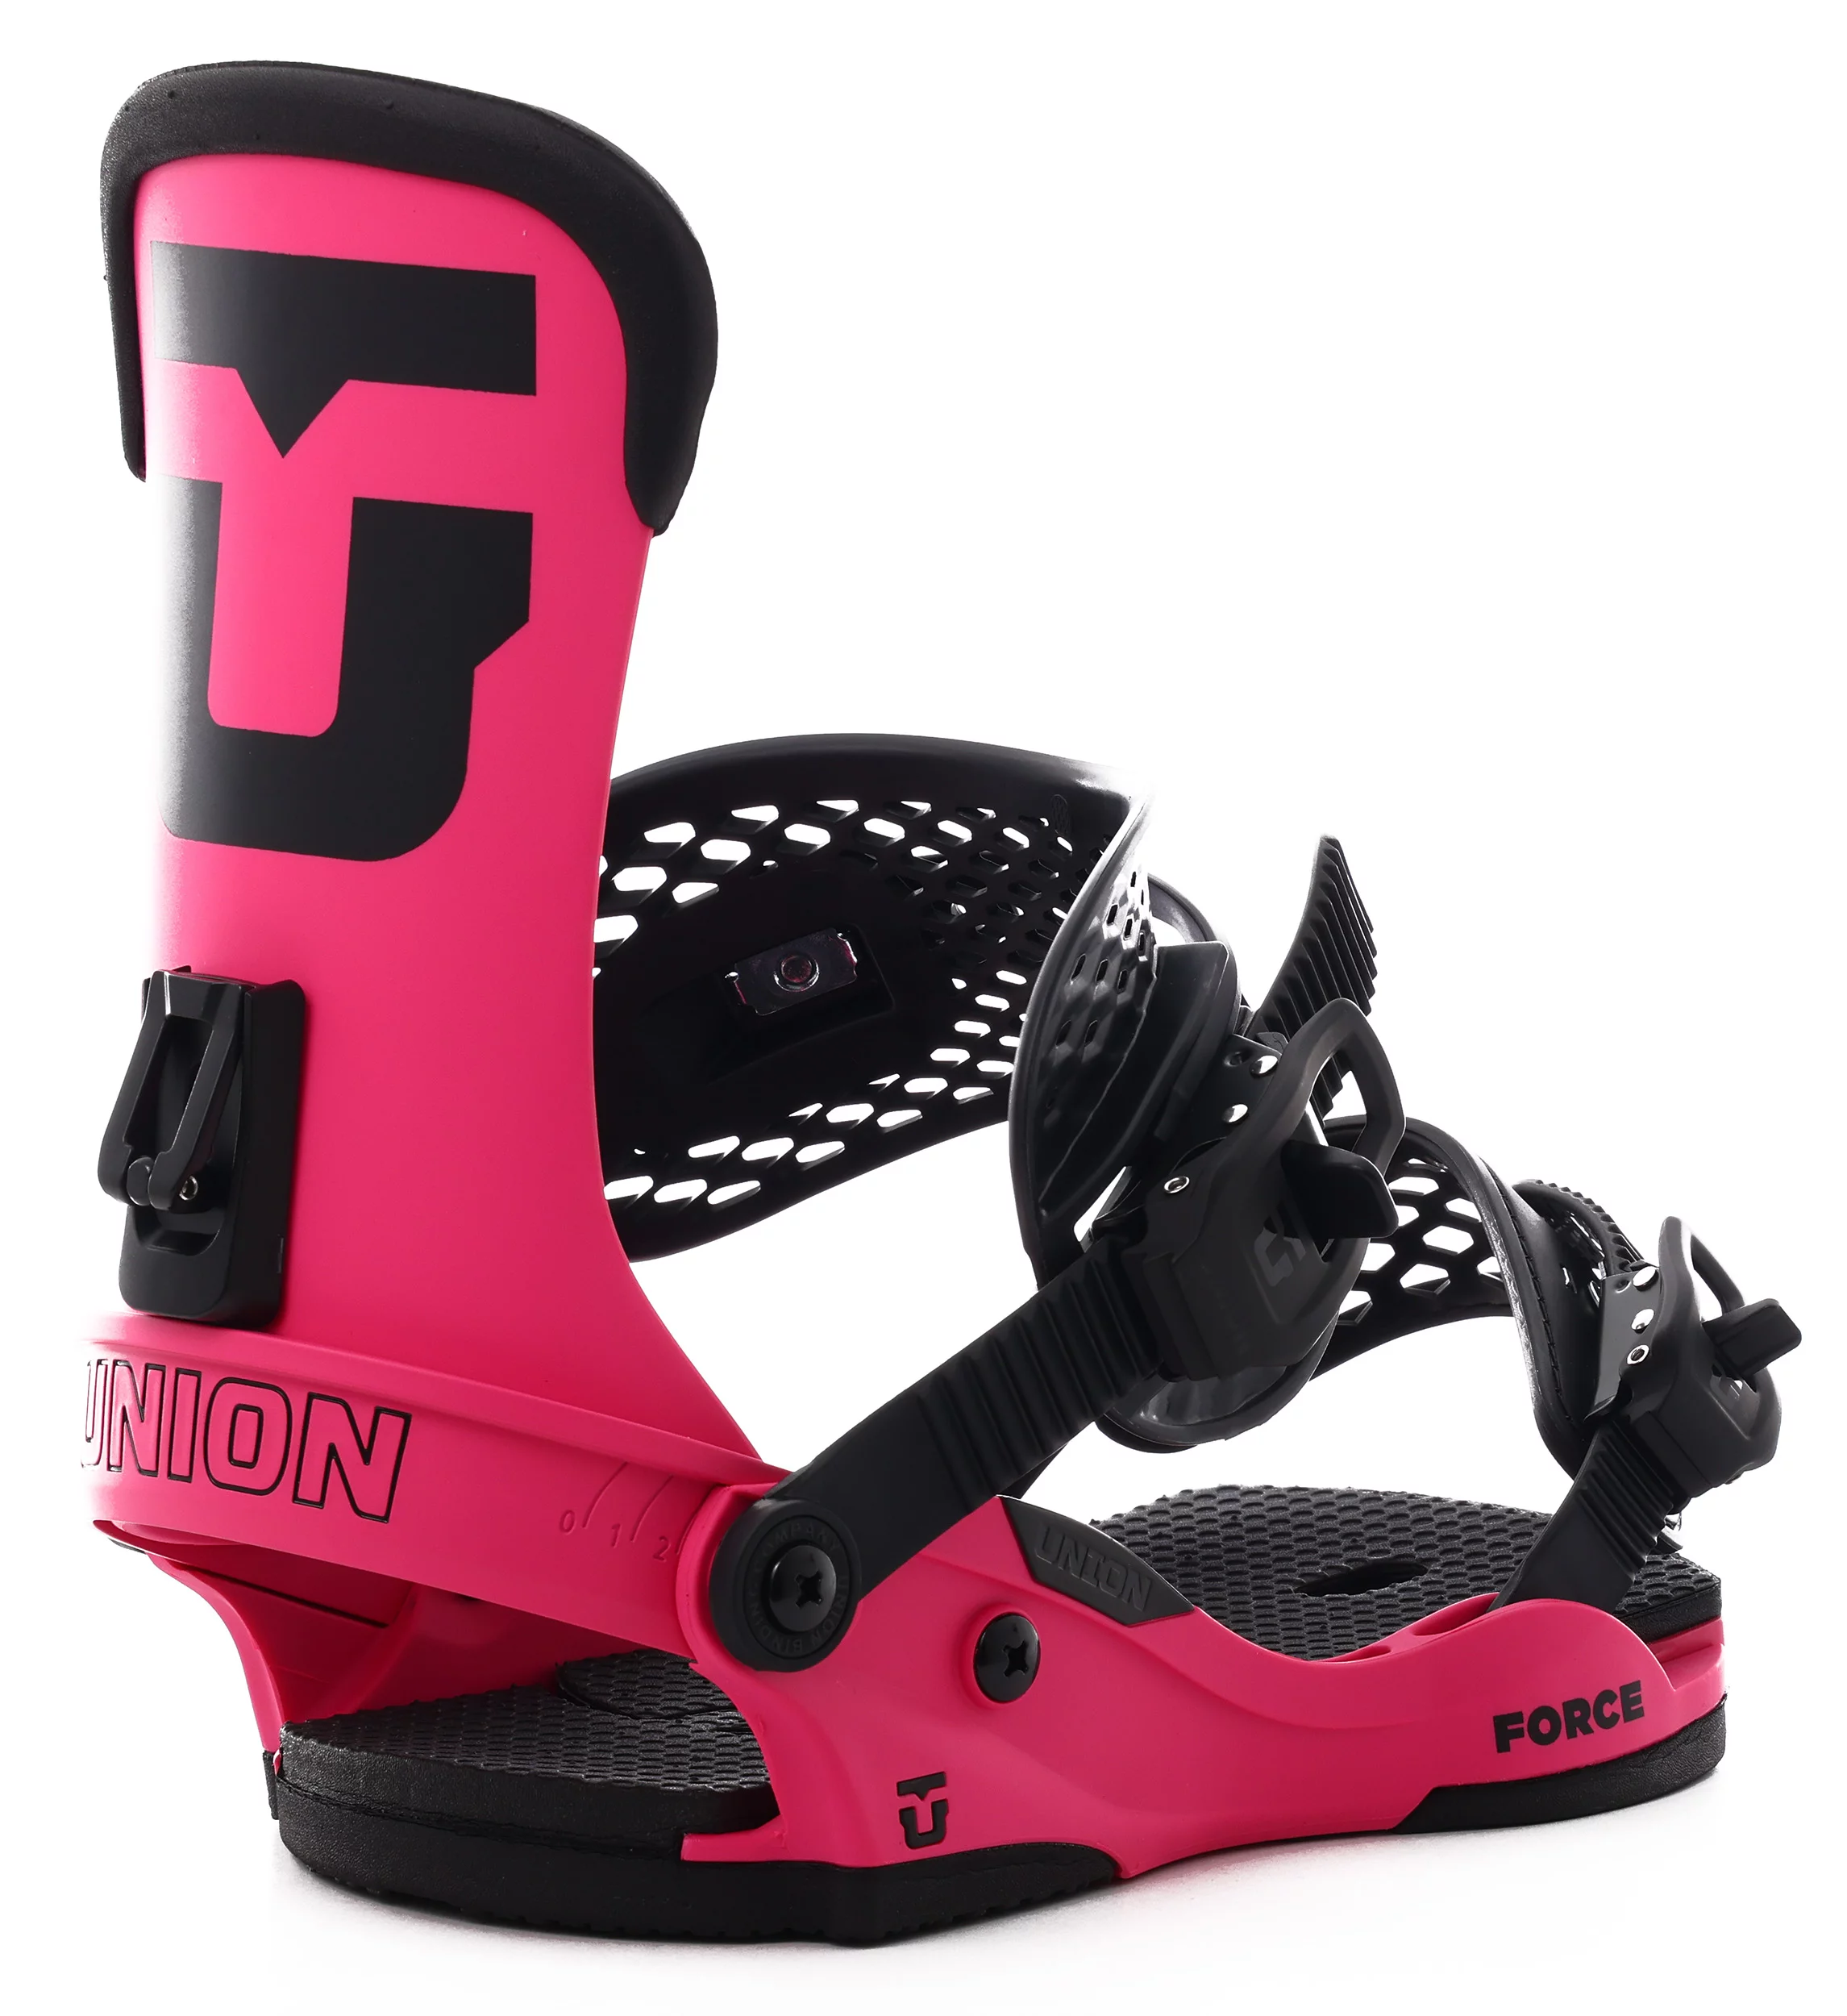 Union Force Snowboard 2023 - Shipping |